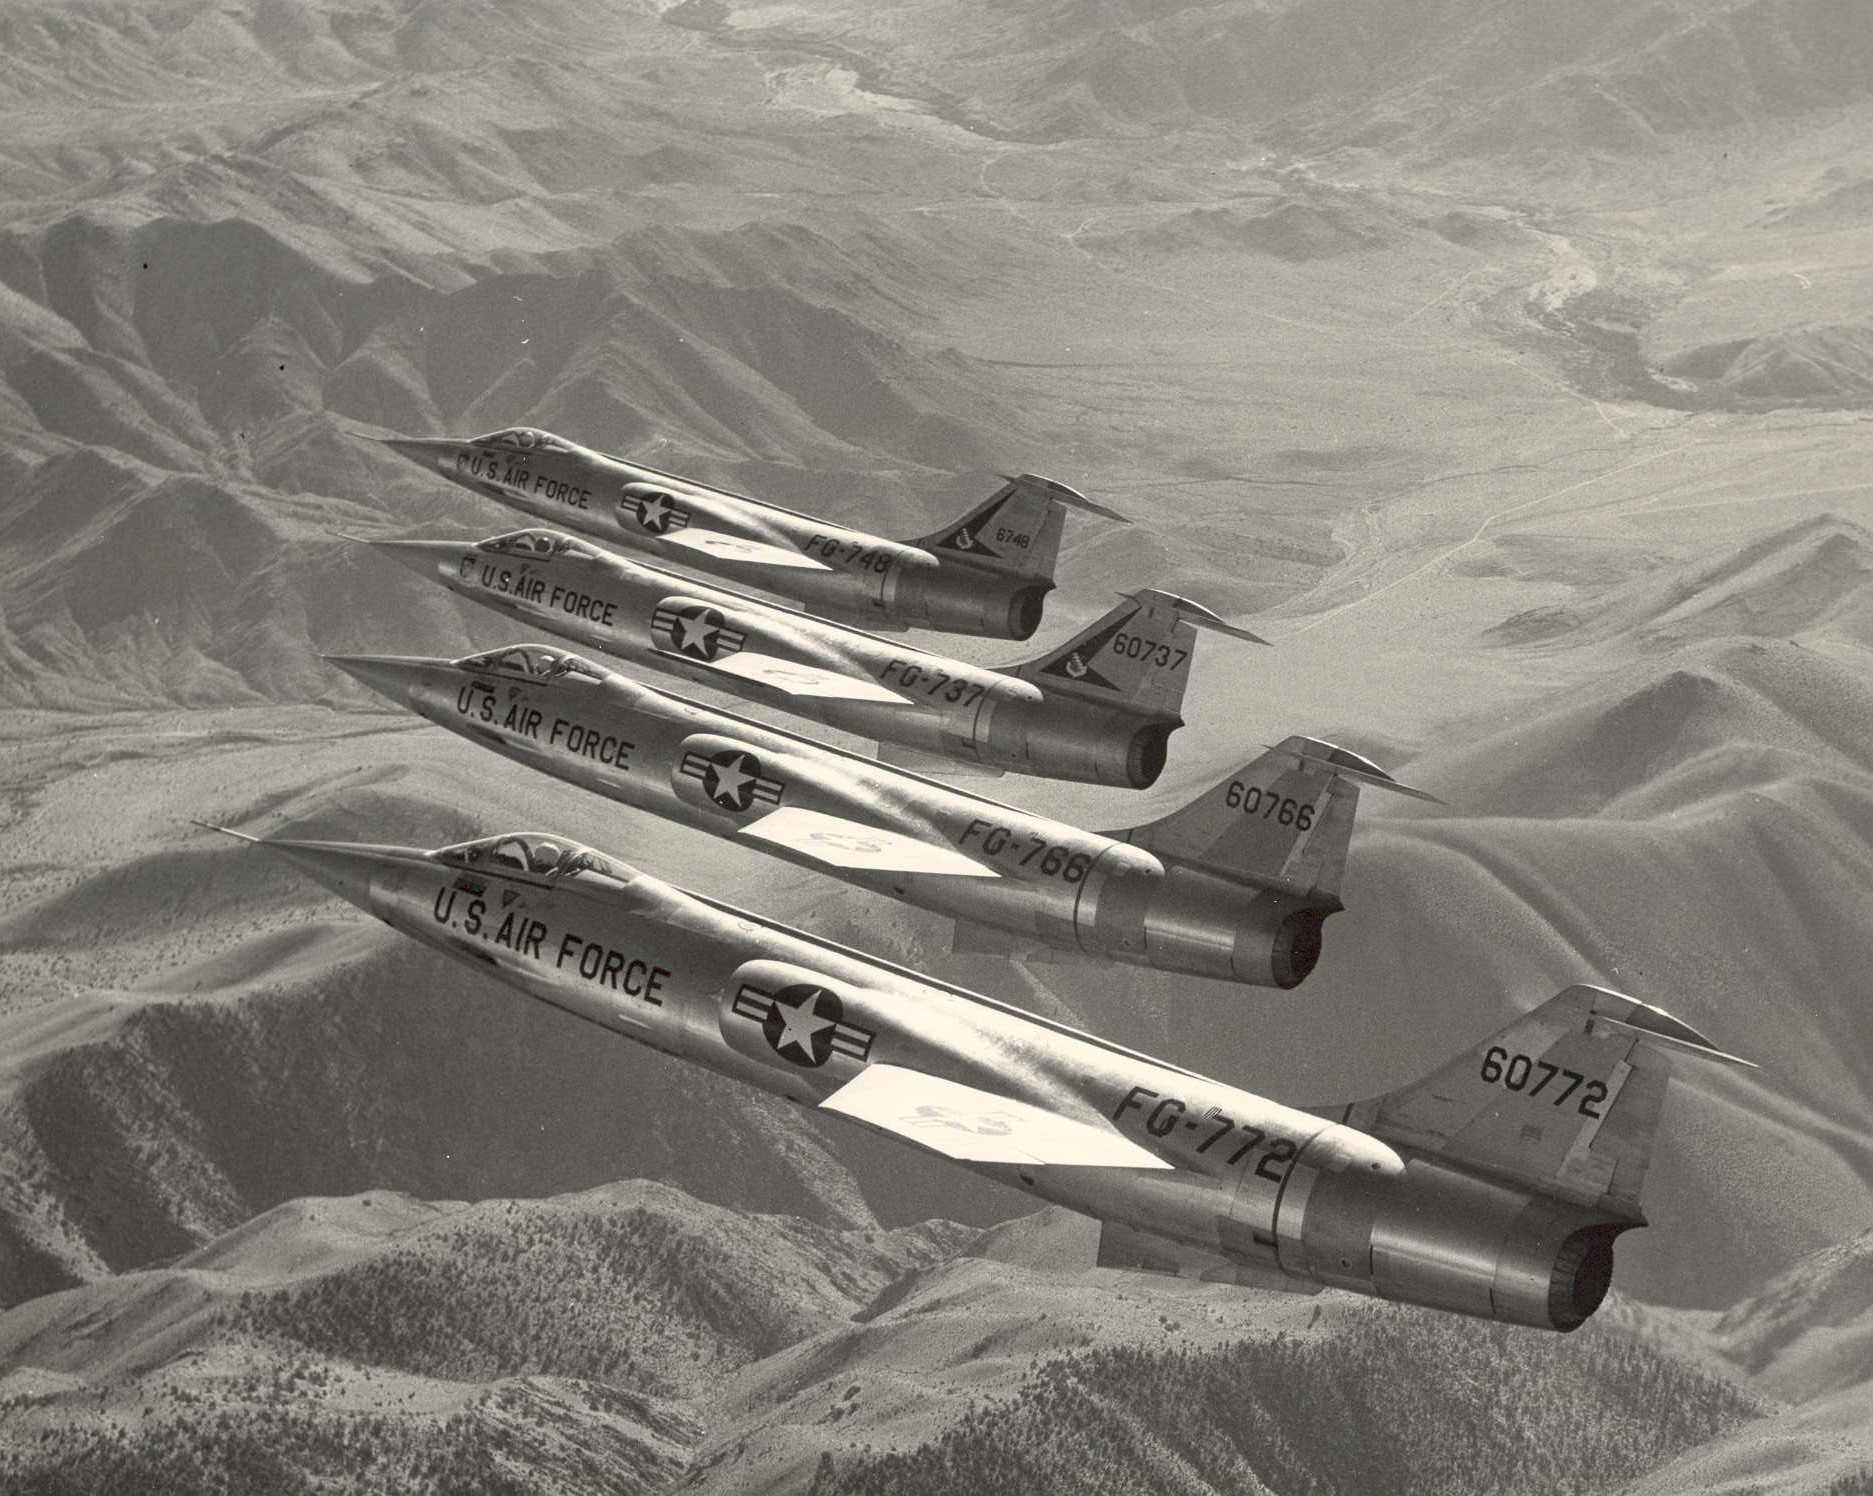 F-104 had a similar wing design to the X-3